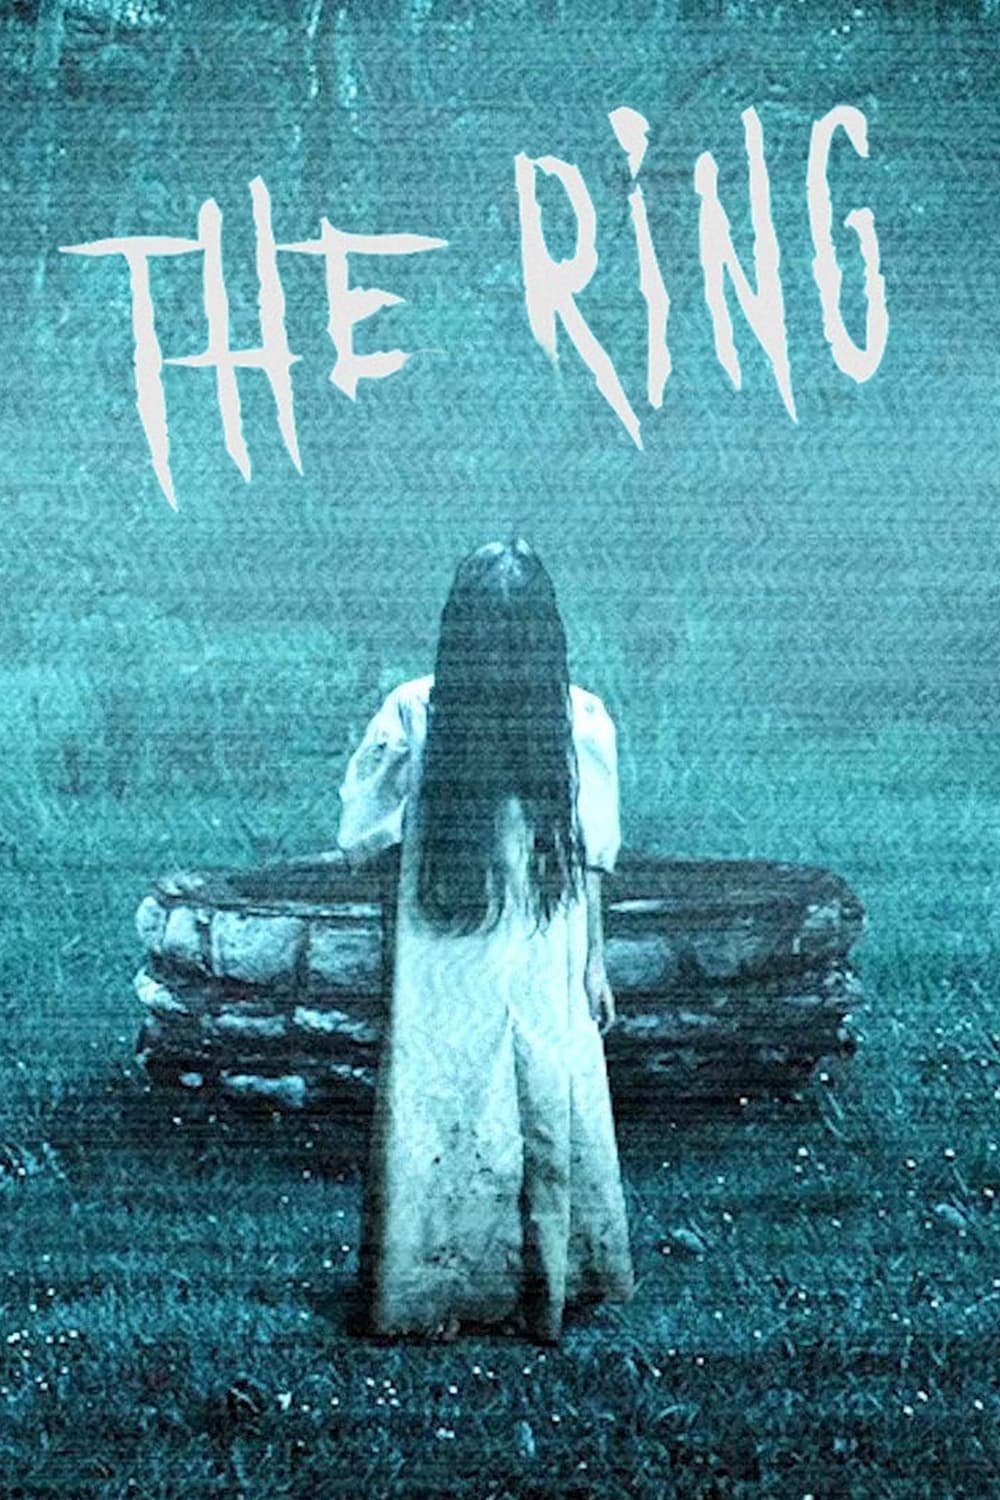 Going viral: The legacy of Ringu. The new Ring movie on the horizon is… |  by Neil Sheppard | Medium